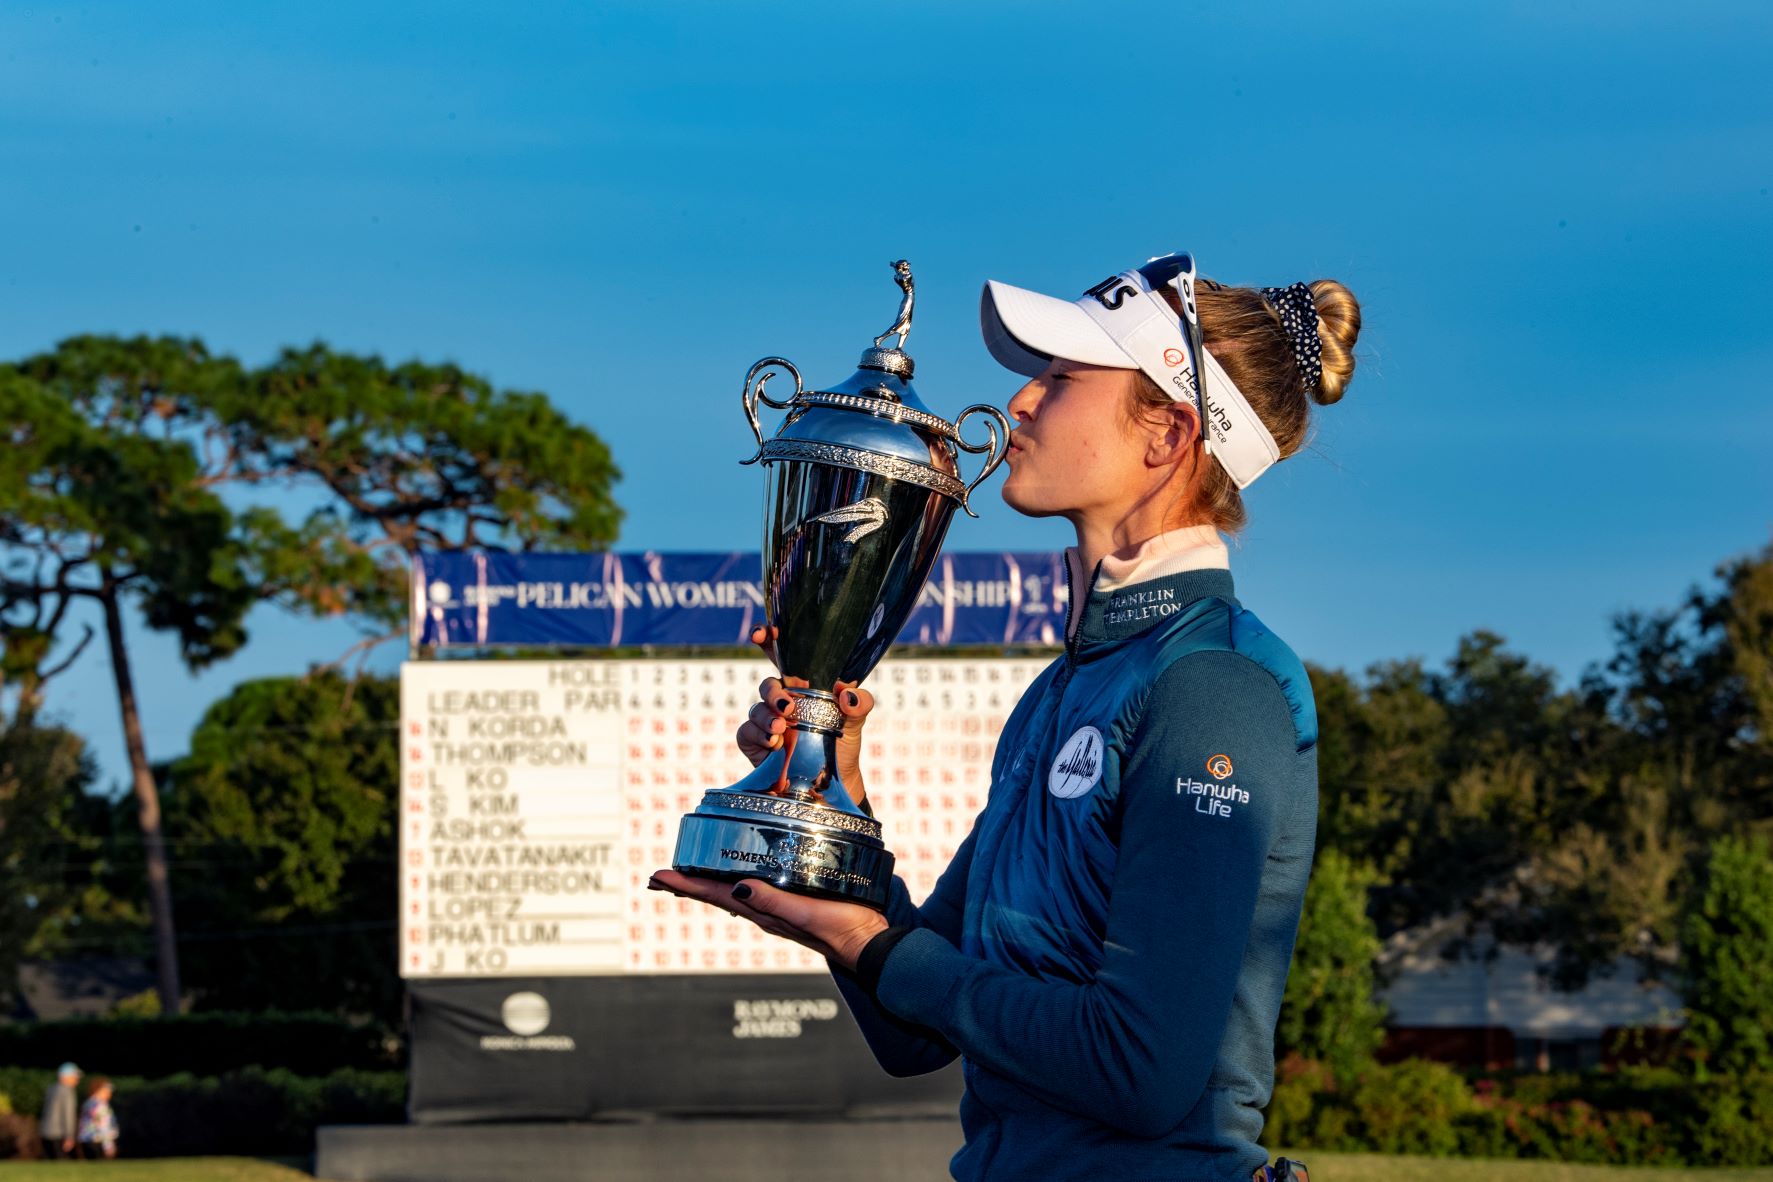 World No. 1 Jin Young Ko, Defending Champion Nelly Korda and Major Champion Lexi Thompson Headline Early Commitments for the 2022 Pelican Women's Championship